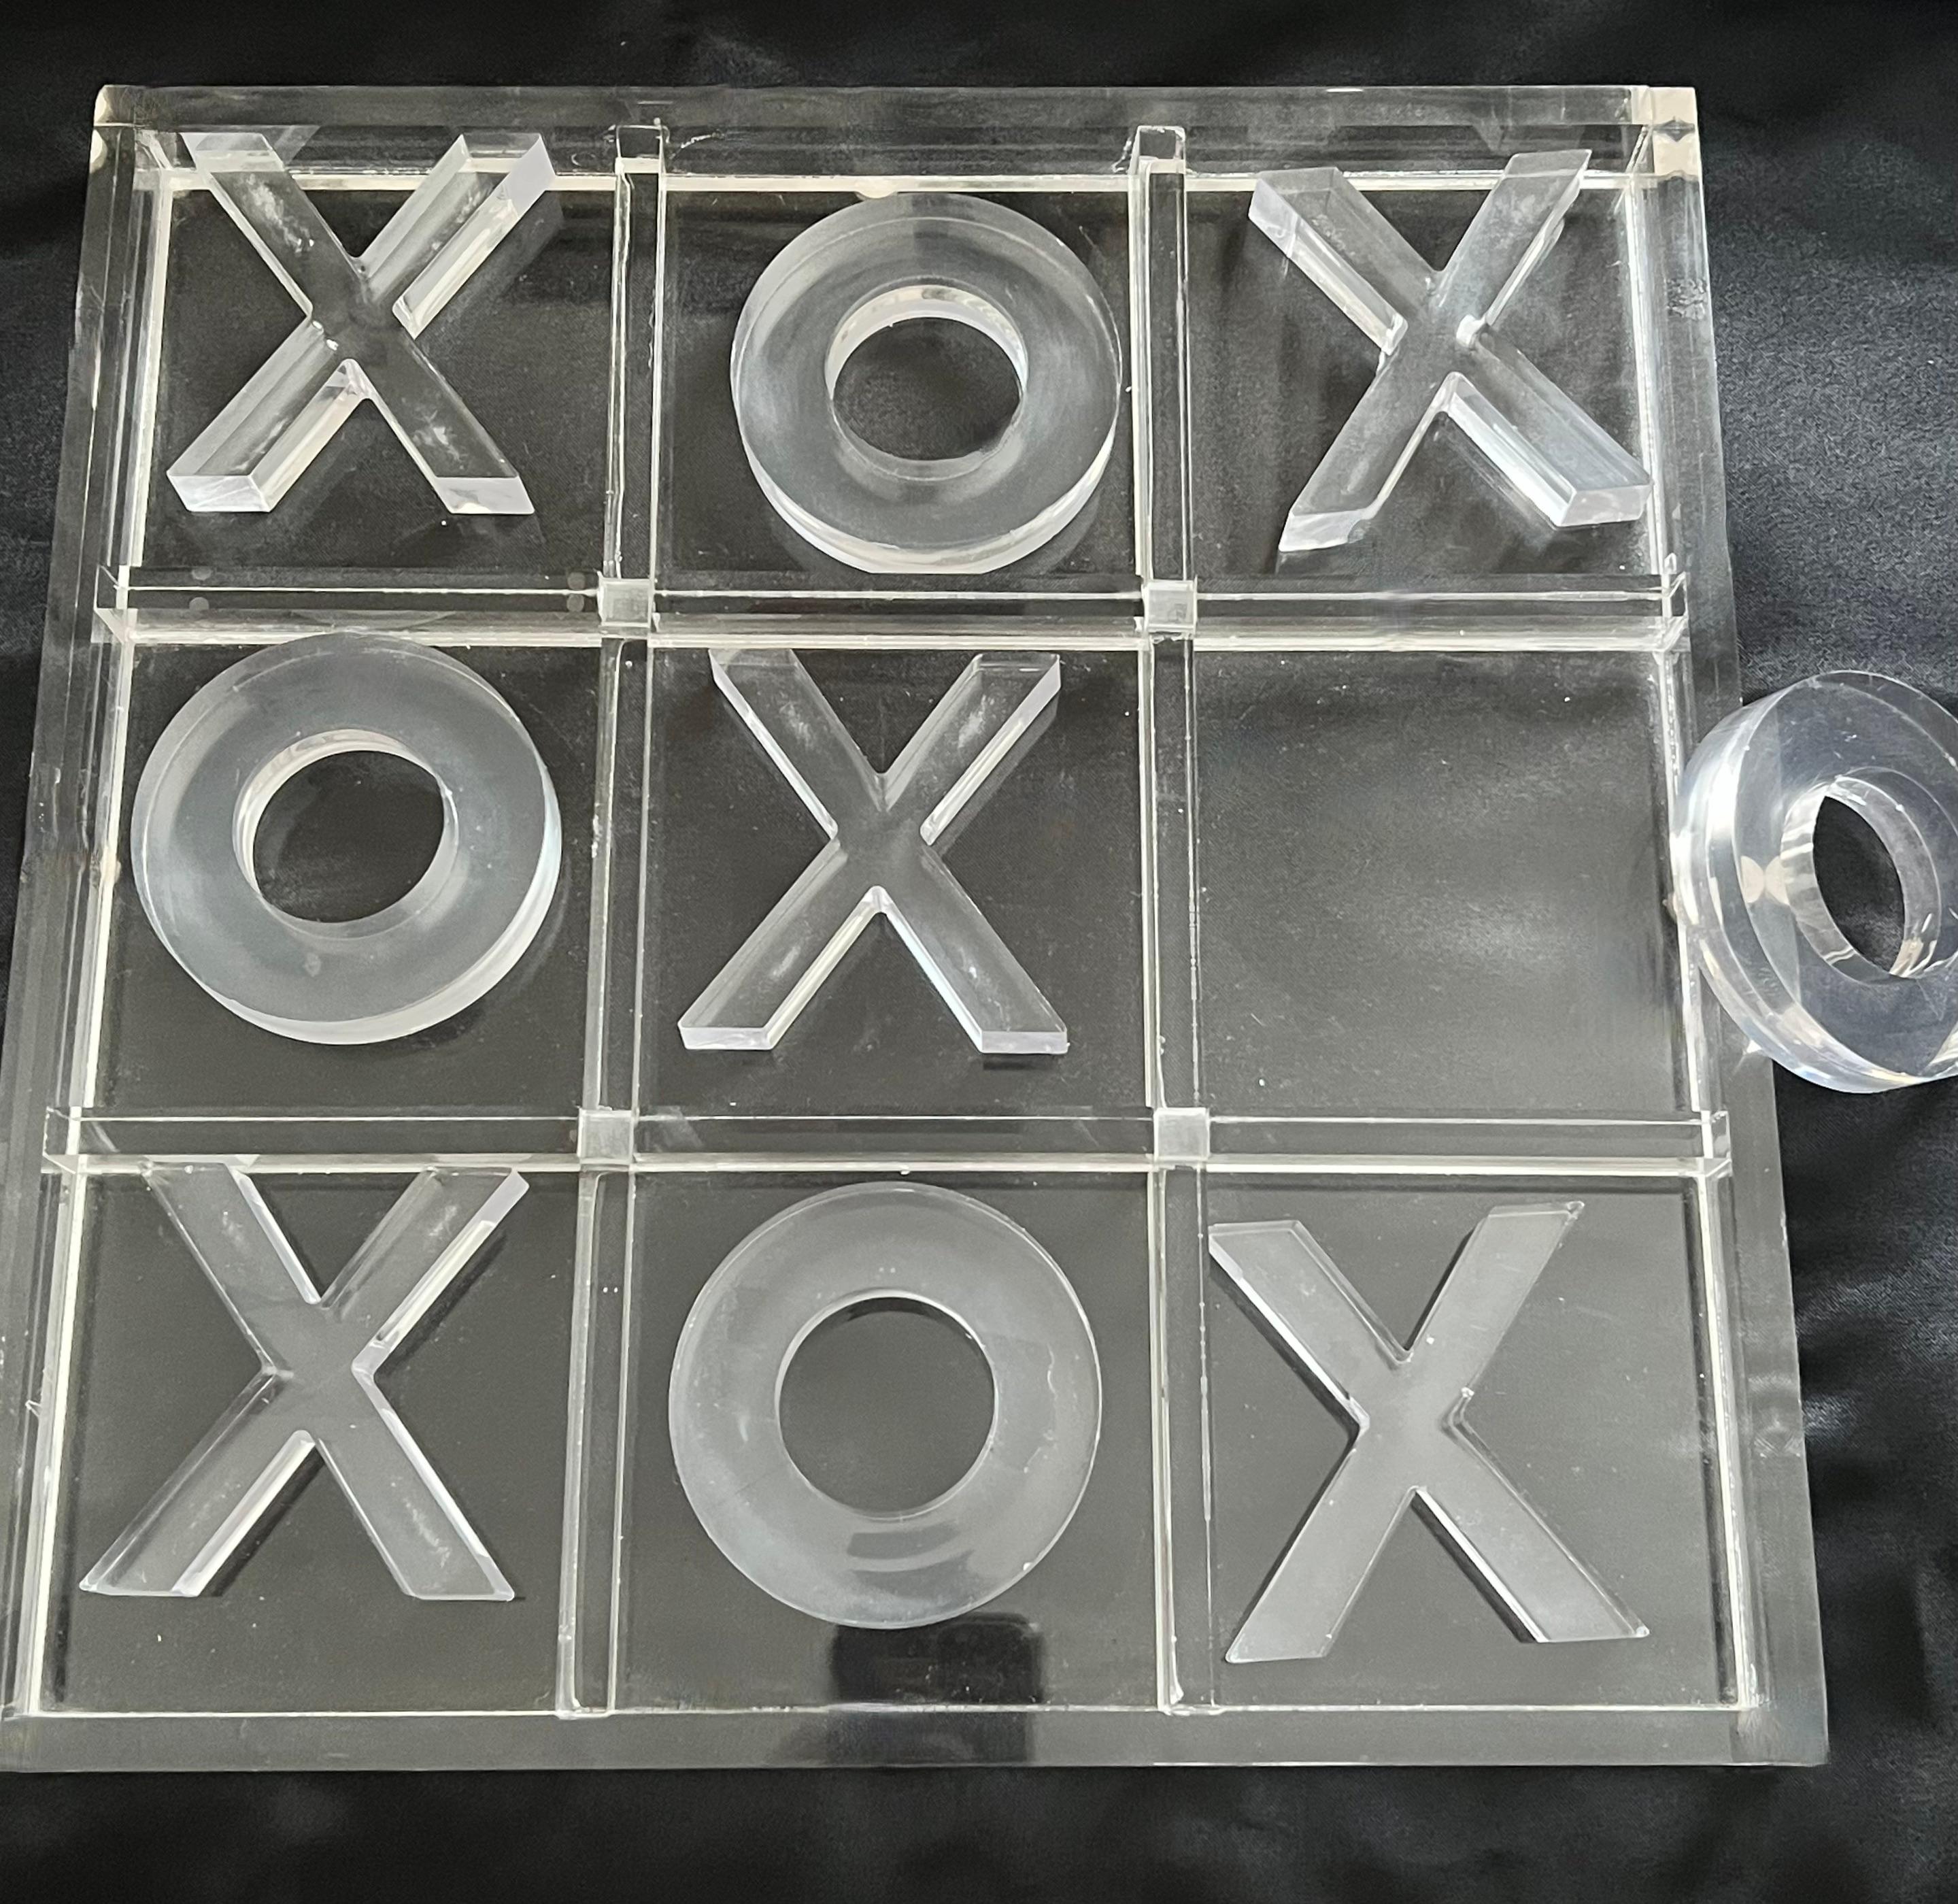 tic tac toe how many pieces